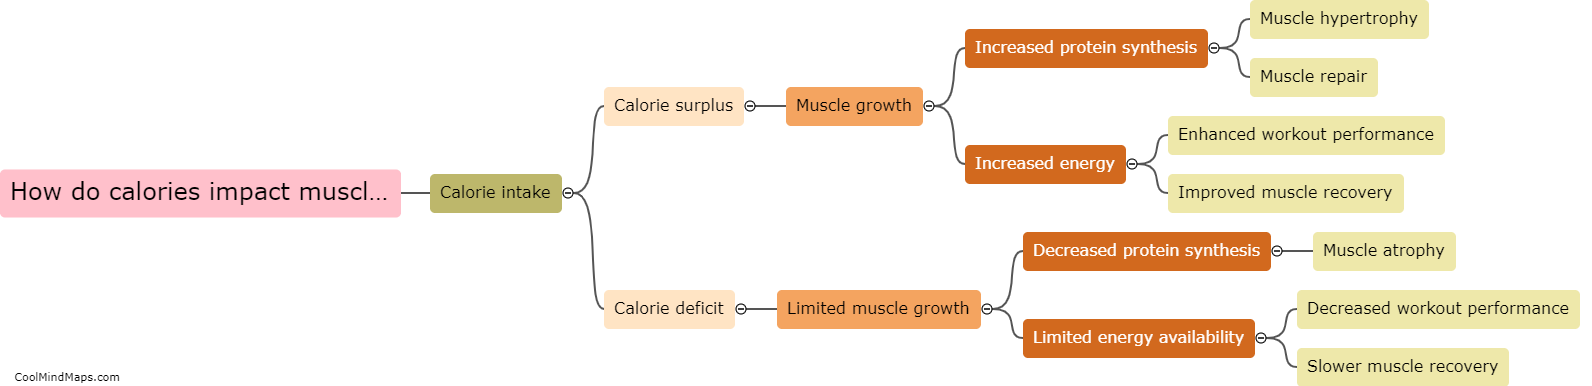 How do calories impact muscle growth?